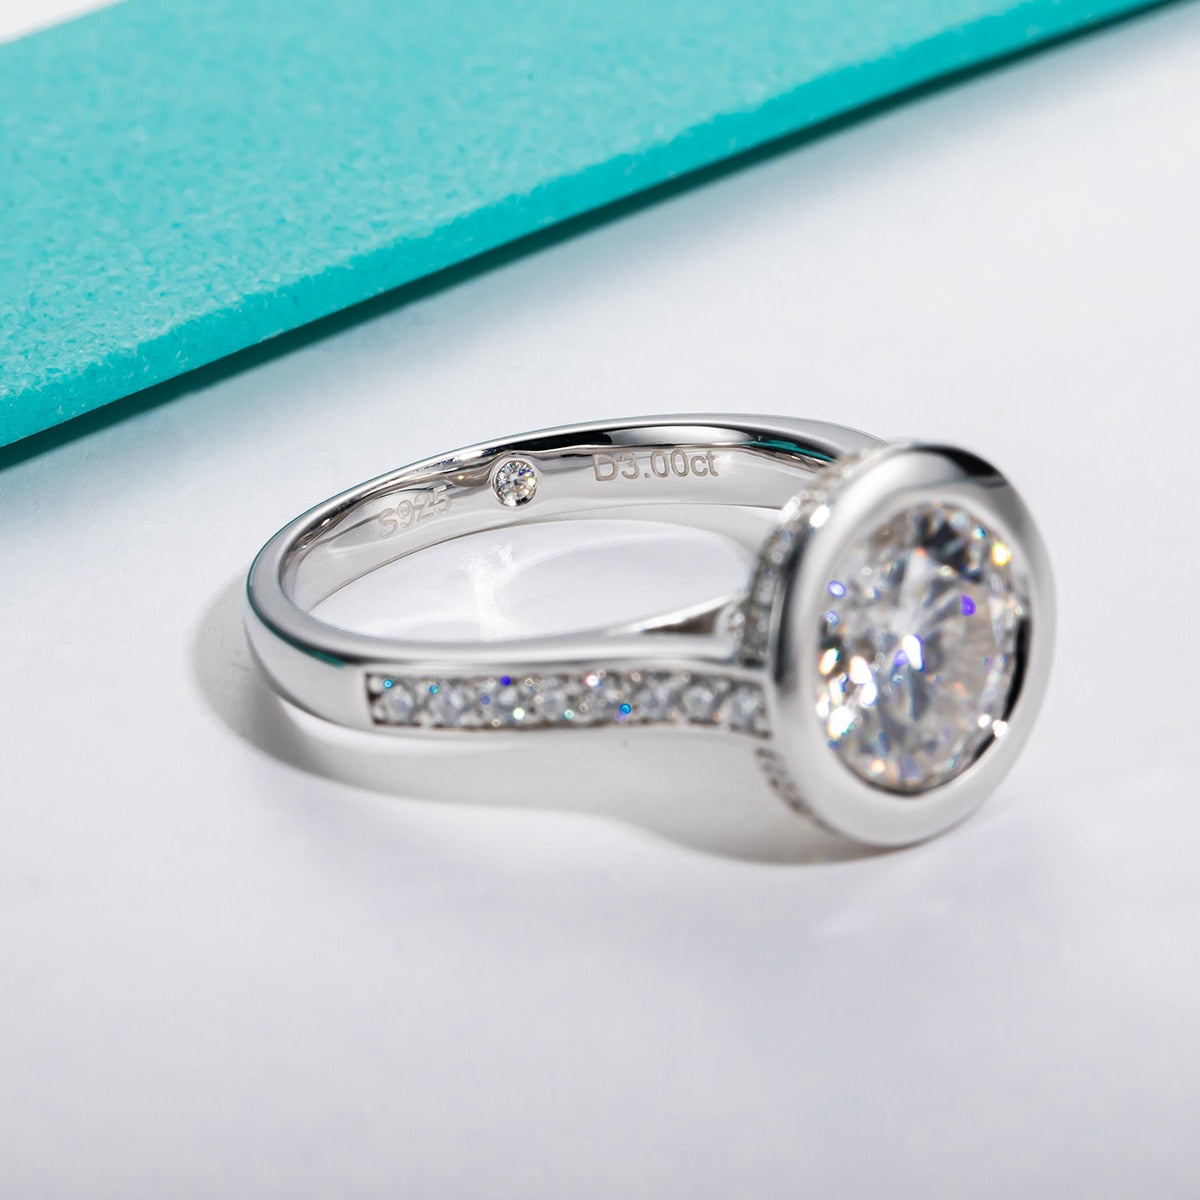 A 3CT moissanite, bezel set in a floating setting on a pave band.